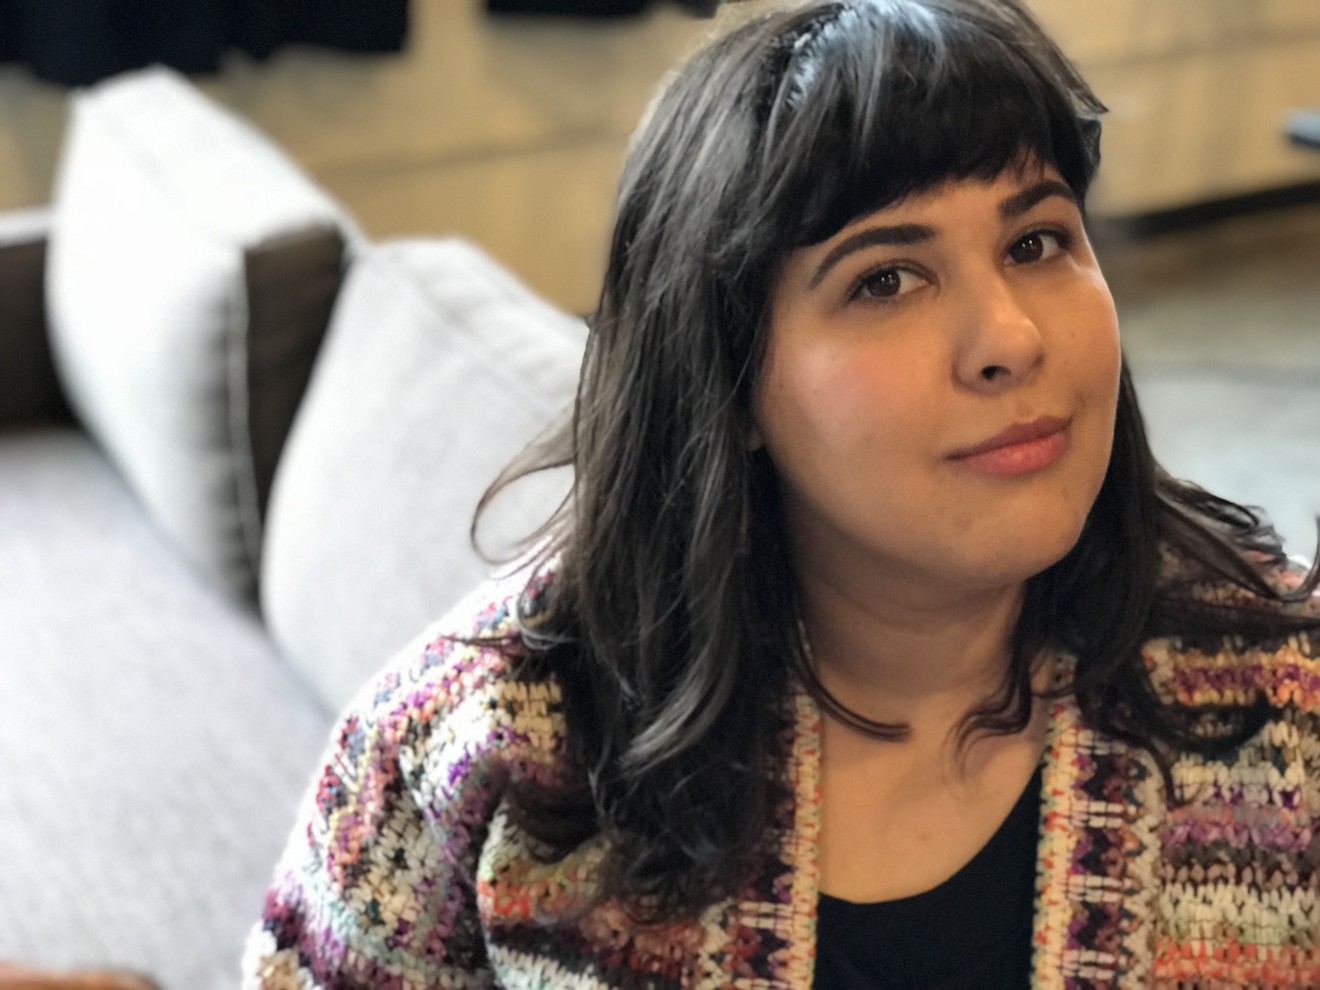 Because of her podcast, Alia Tavakolian knows more than she thought possible about the internet.